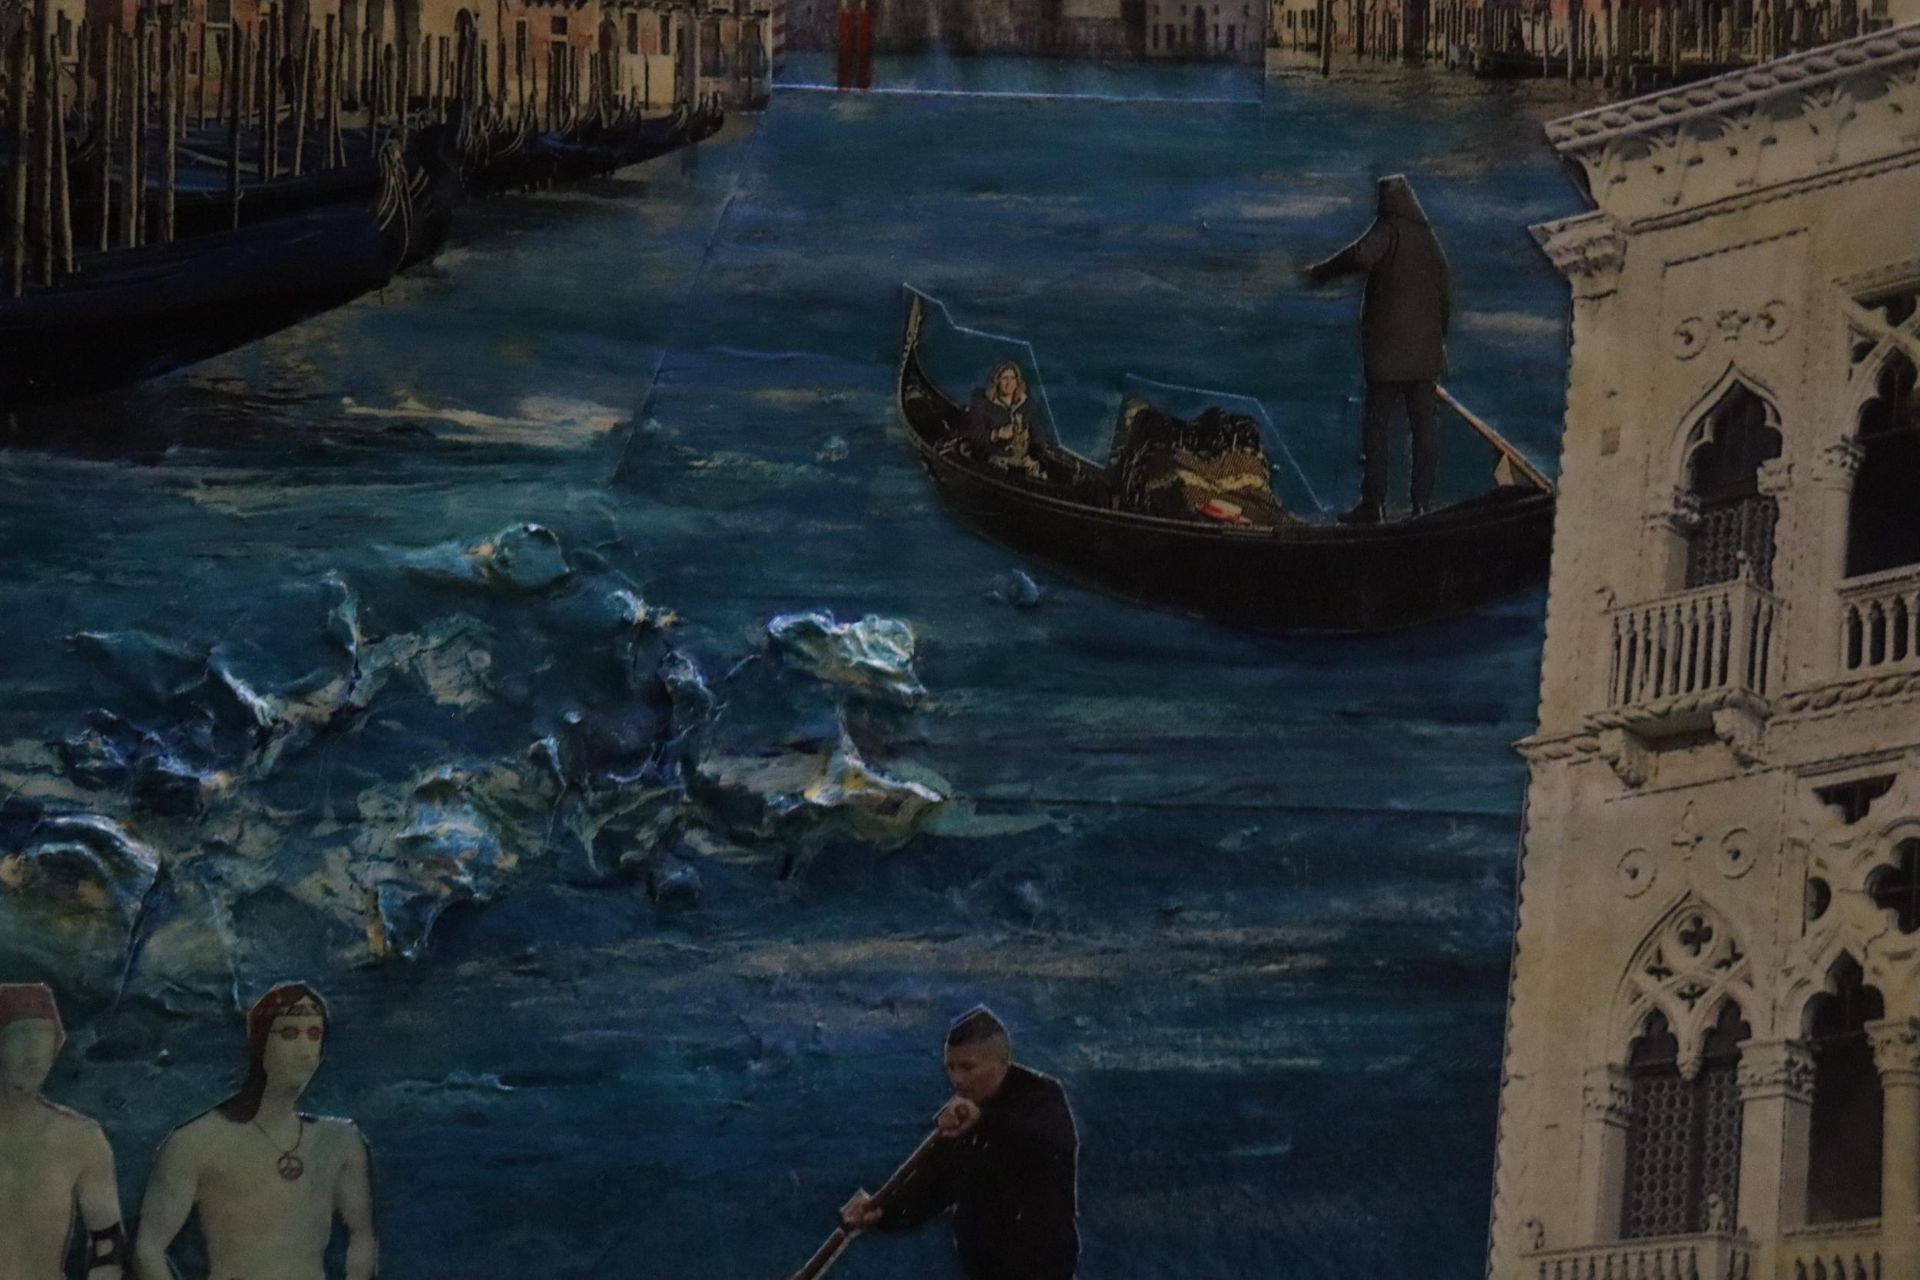 A FUTURISTIC OIL PAINTING WITH MONTAGES OF VENICE - Image 2 of 4